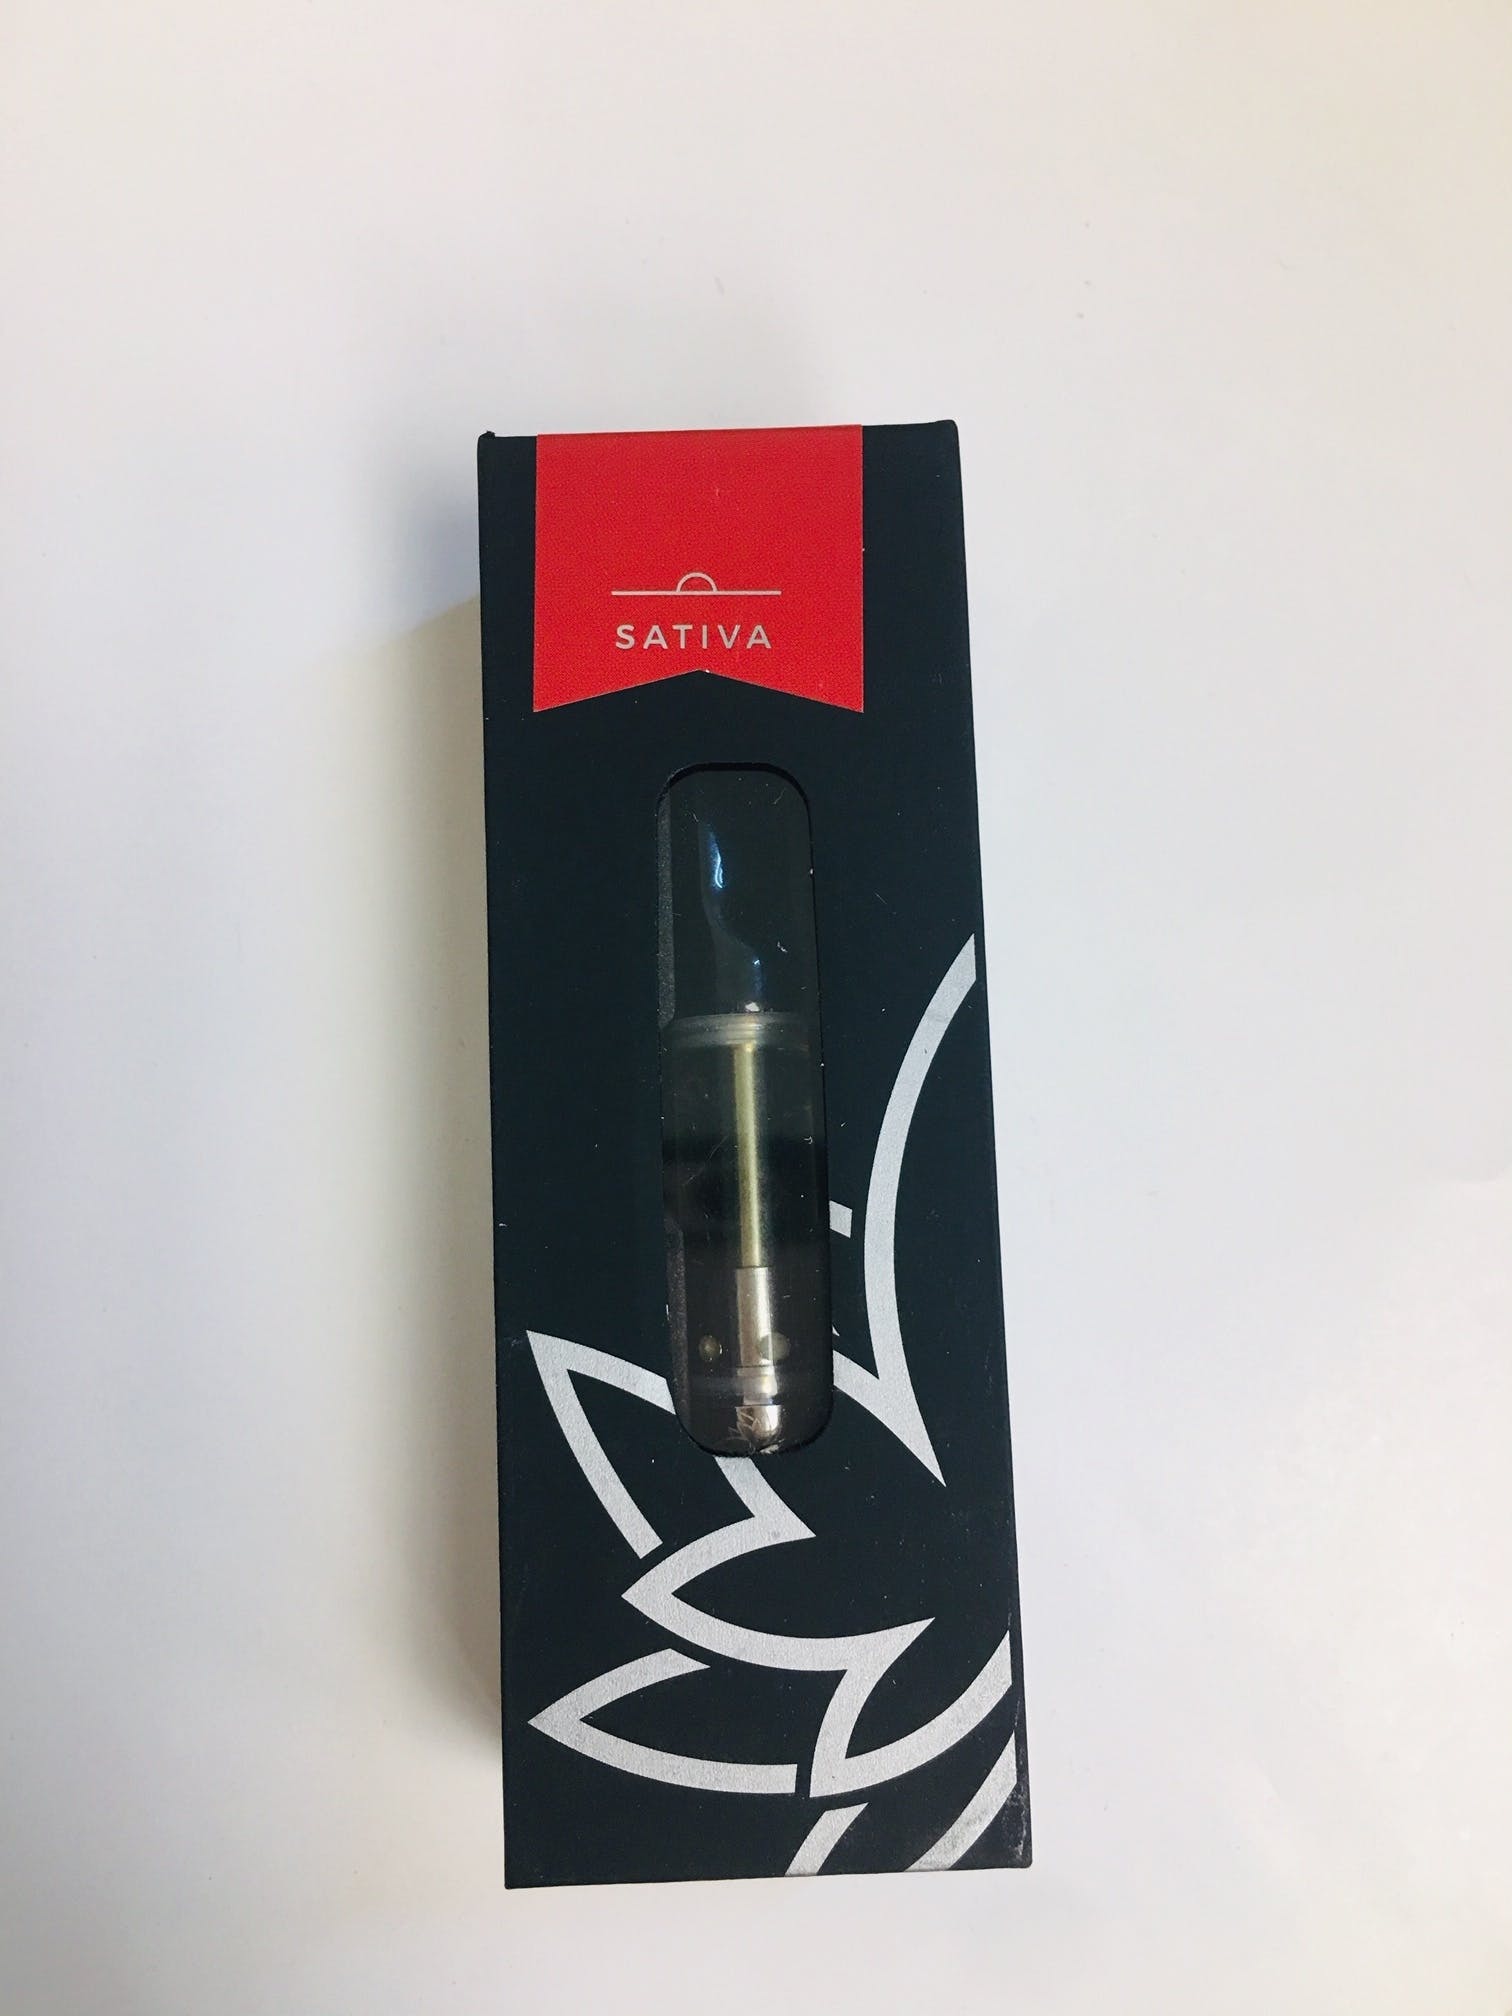 concentrate-sativa-blend-500mg-cartridge-grassroots